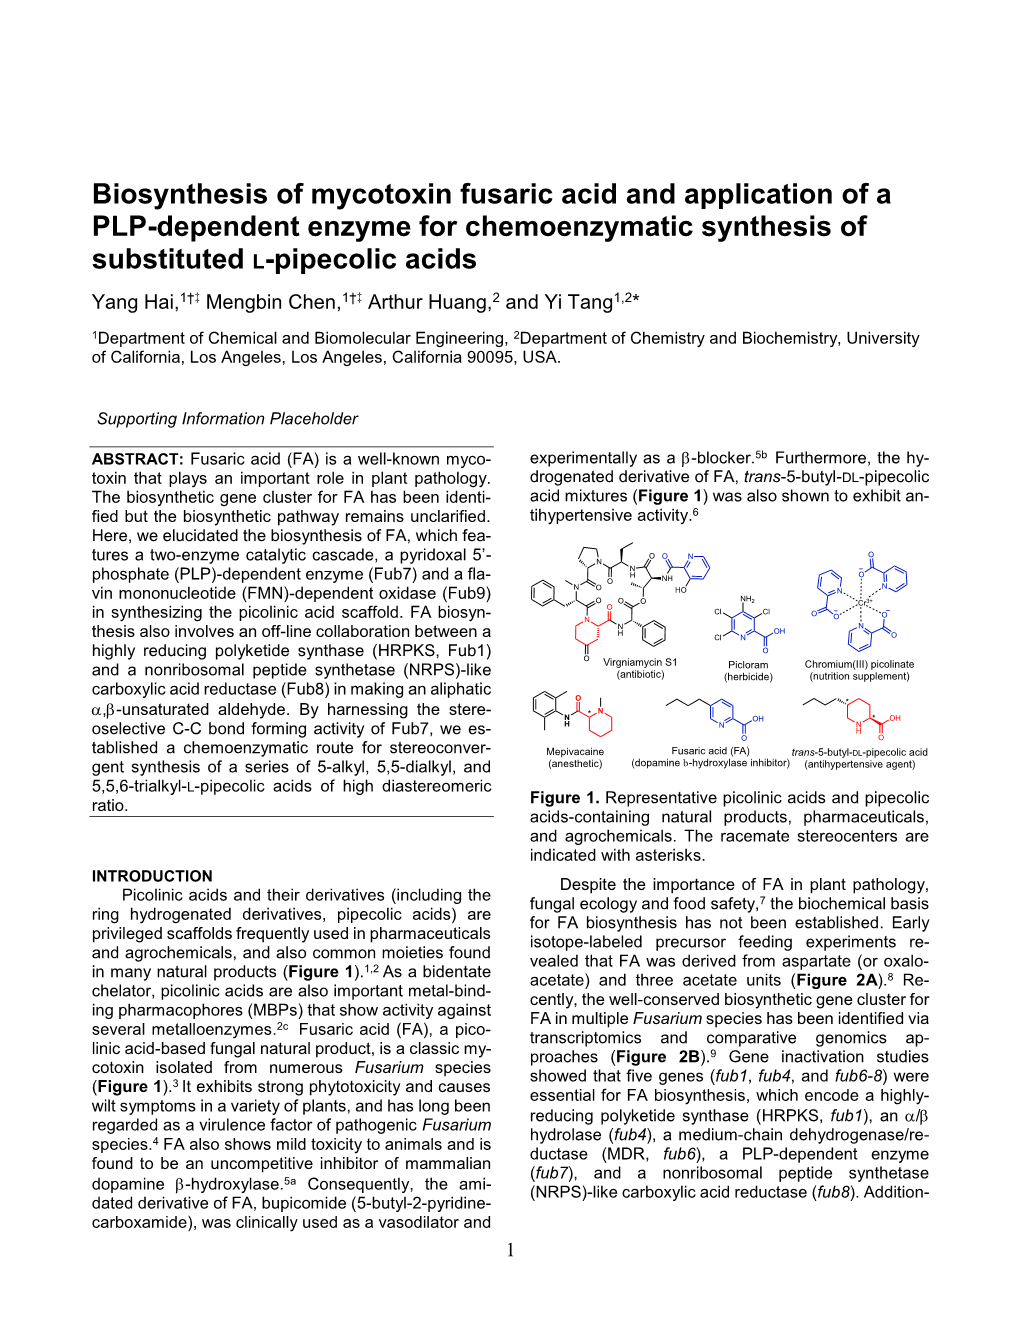 Biosynthesis of Mycotoxin Fusaric Acid and Application of a PLP